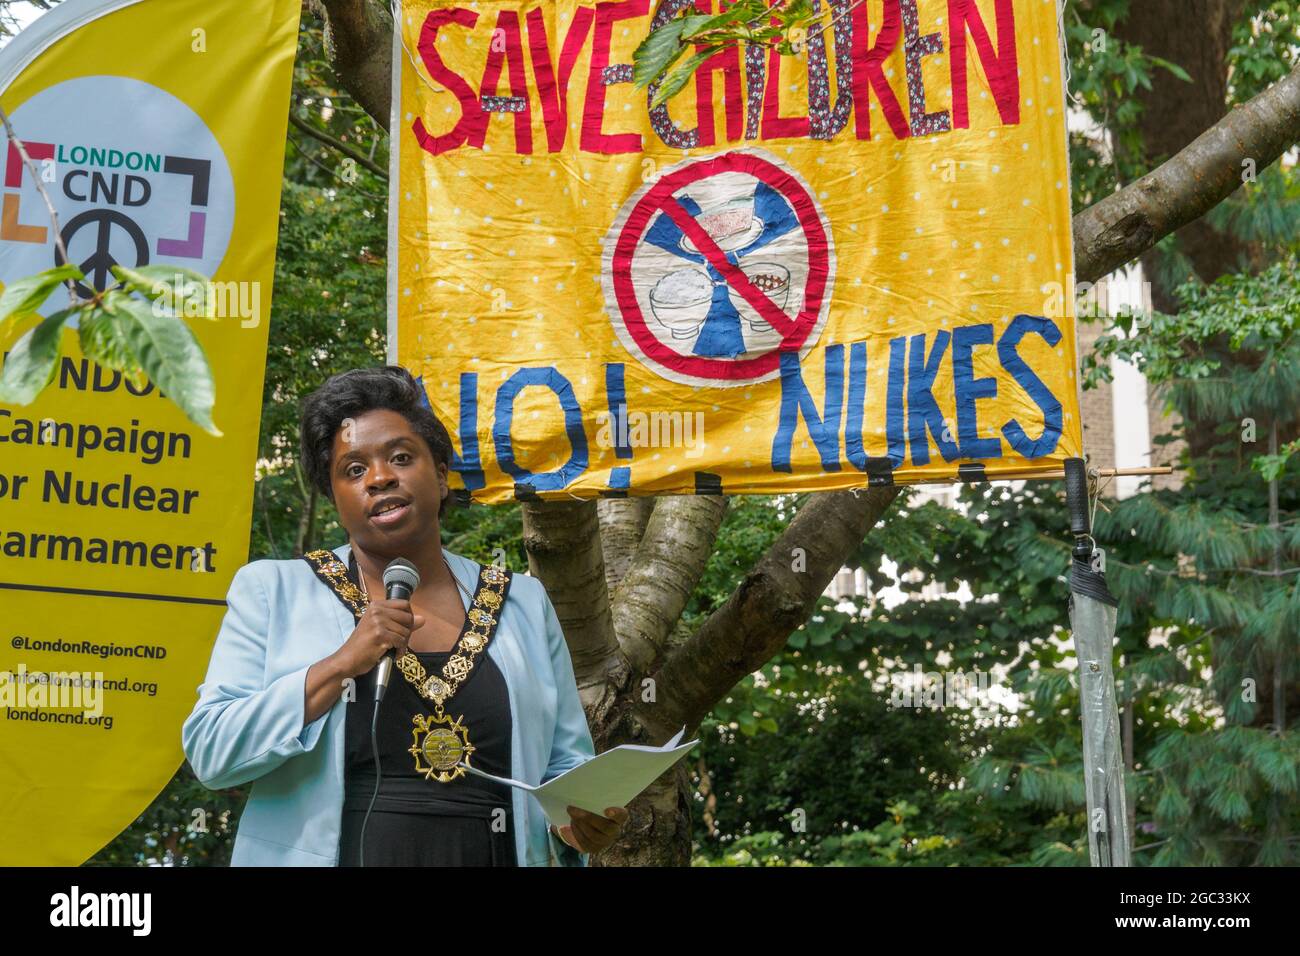 London, UK. 6th August 2021. Sabrina Francis, Mayor of Camden speaks. 76 years after atomic bombs were dropped on Hiroshima and Nagaski, London CND met at the Hiroshima Cherry tree in Tavistock Square to remember the many killed and survivors who are still suffering the event, and to celebrate the UN treaty prohibiting nuclear weapons which came into force this January. They called on the government to end the UK's nuclear weapon programme. Peter Marshall/Alamy Live News Stock Photo